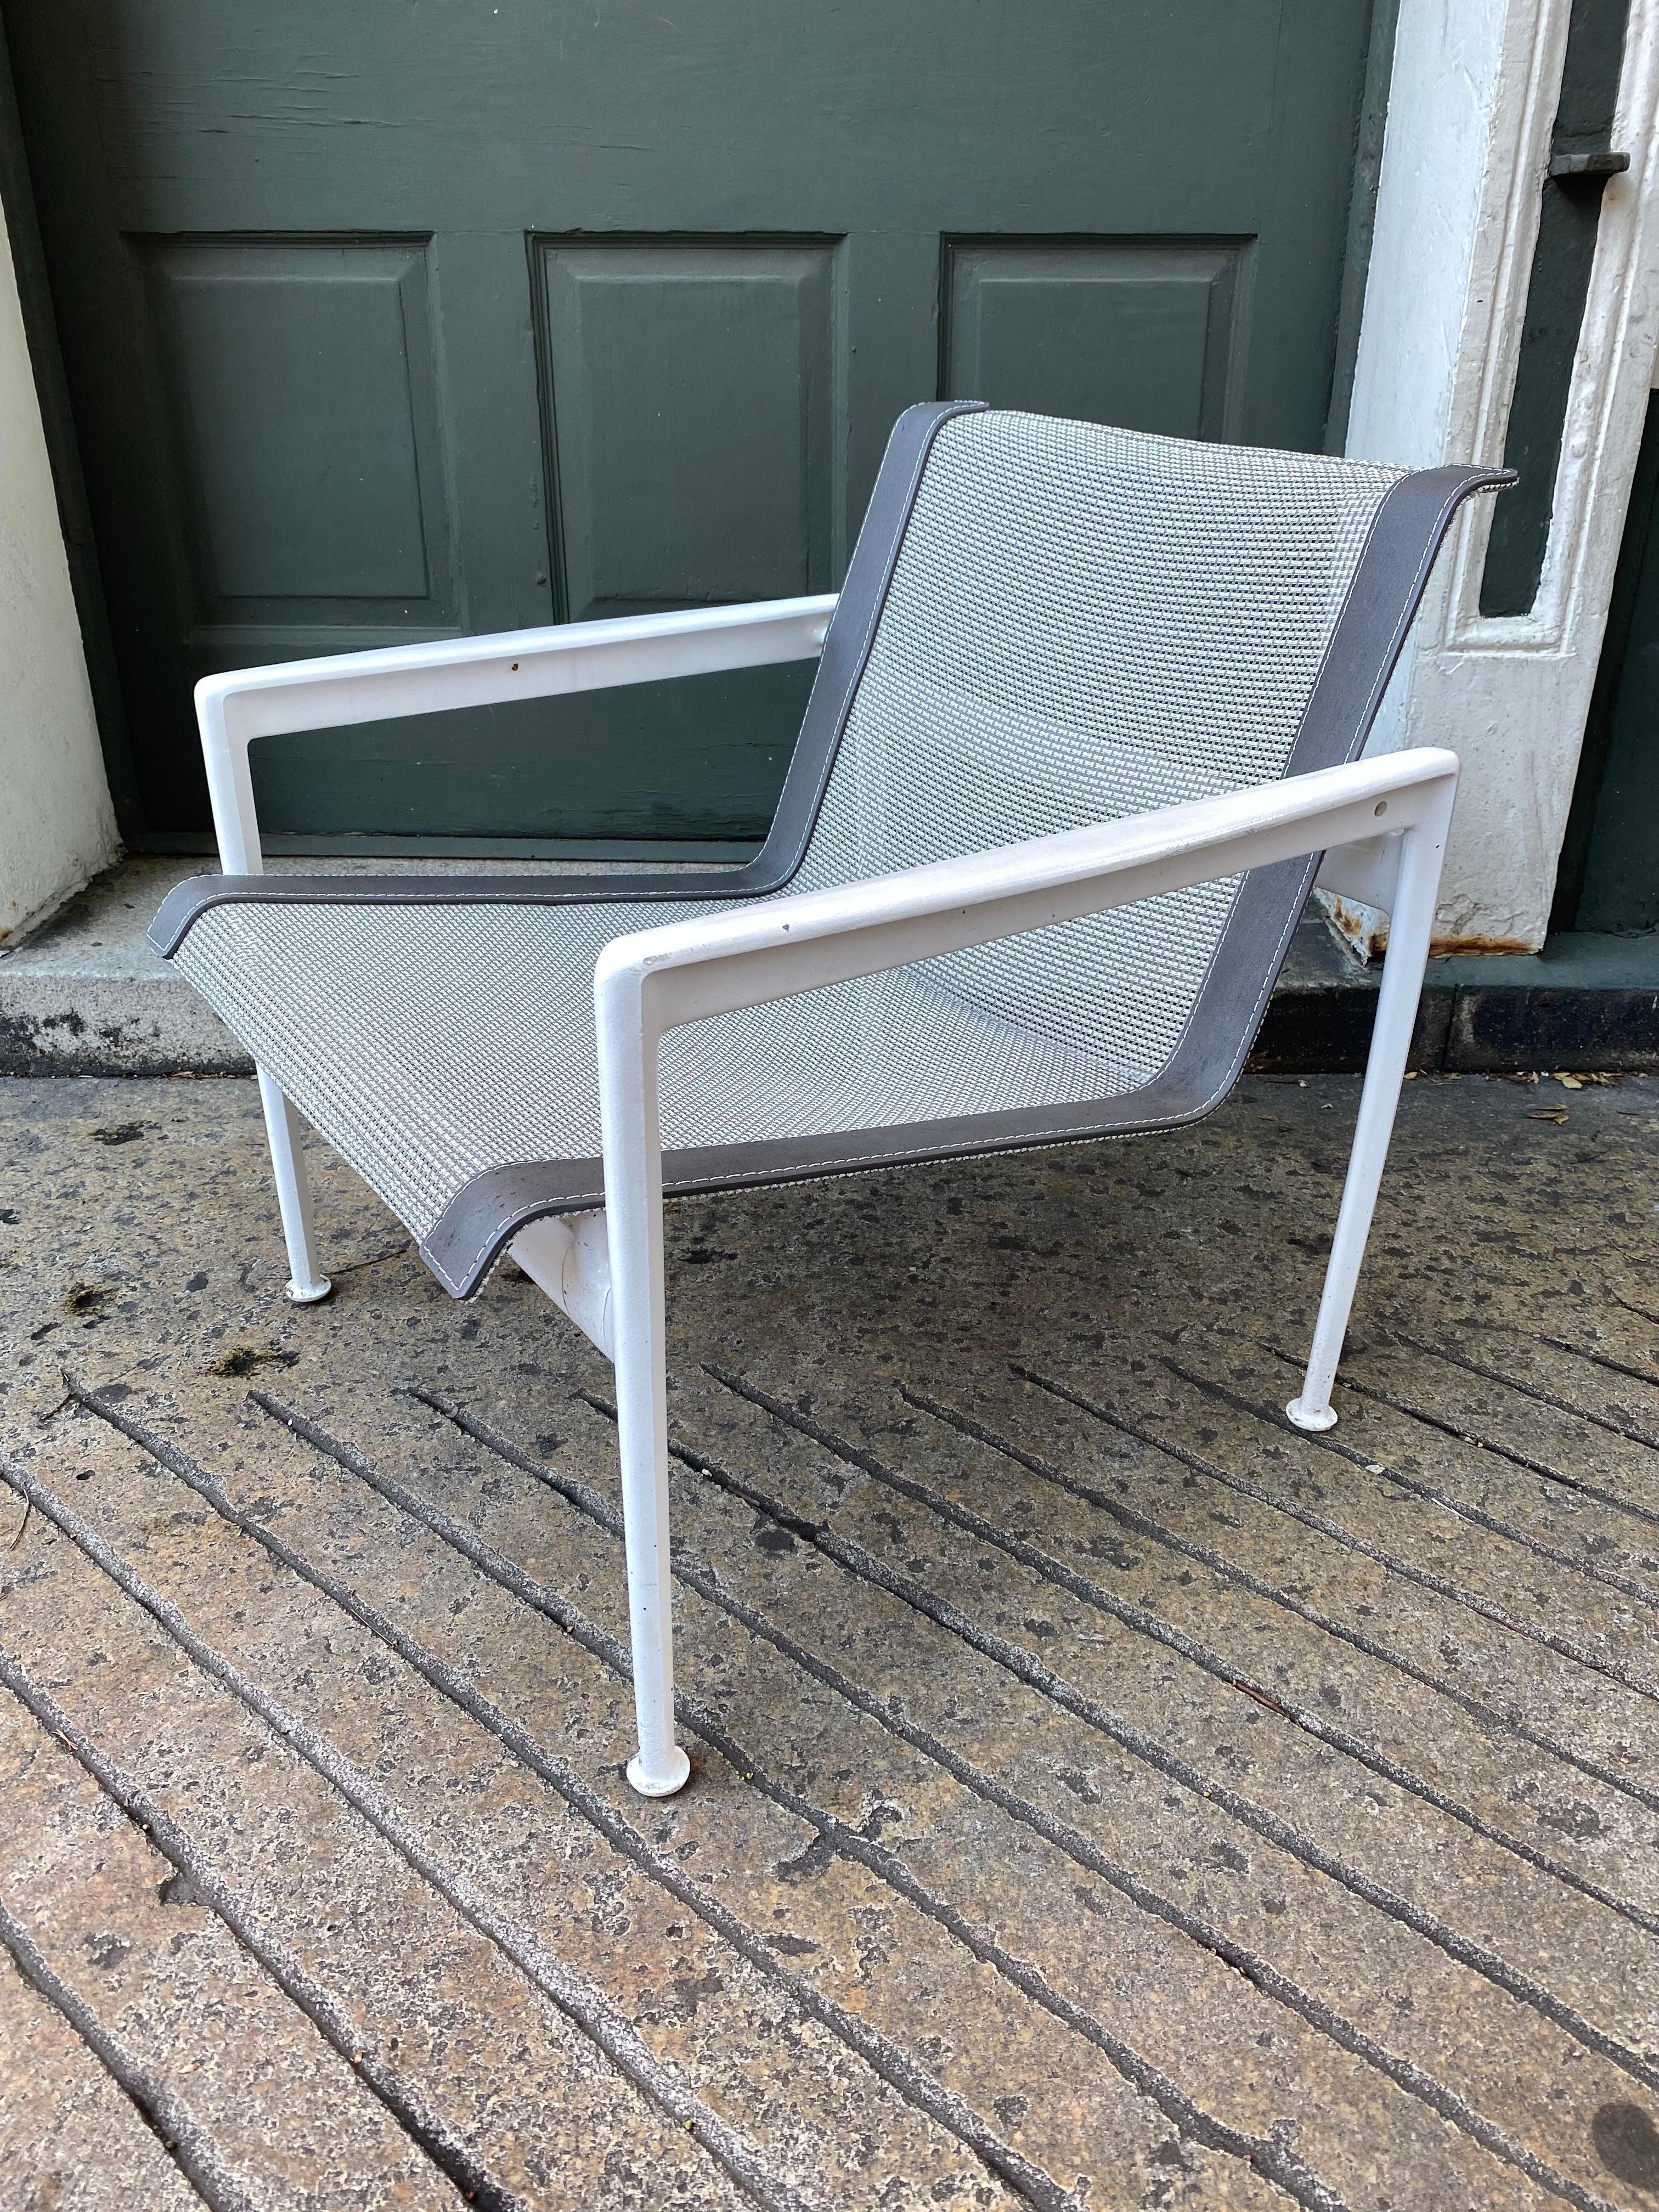 Pair of Richard Schultz 1966 Series lounge chairs. Chairs date to the 1970's but were repainted within last 10 years, new covers were installed at the same time. Overall in great shape, shows a couple scuffs.